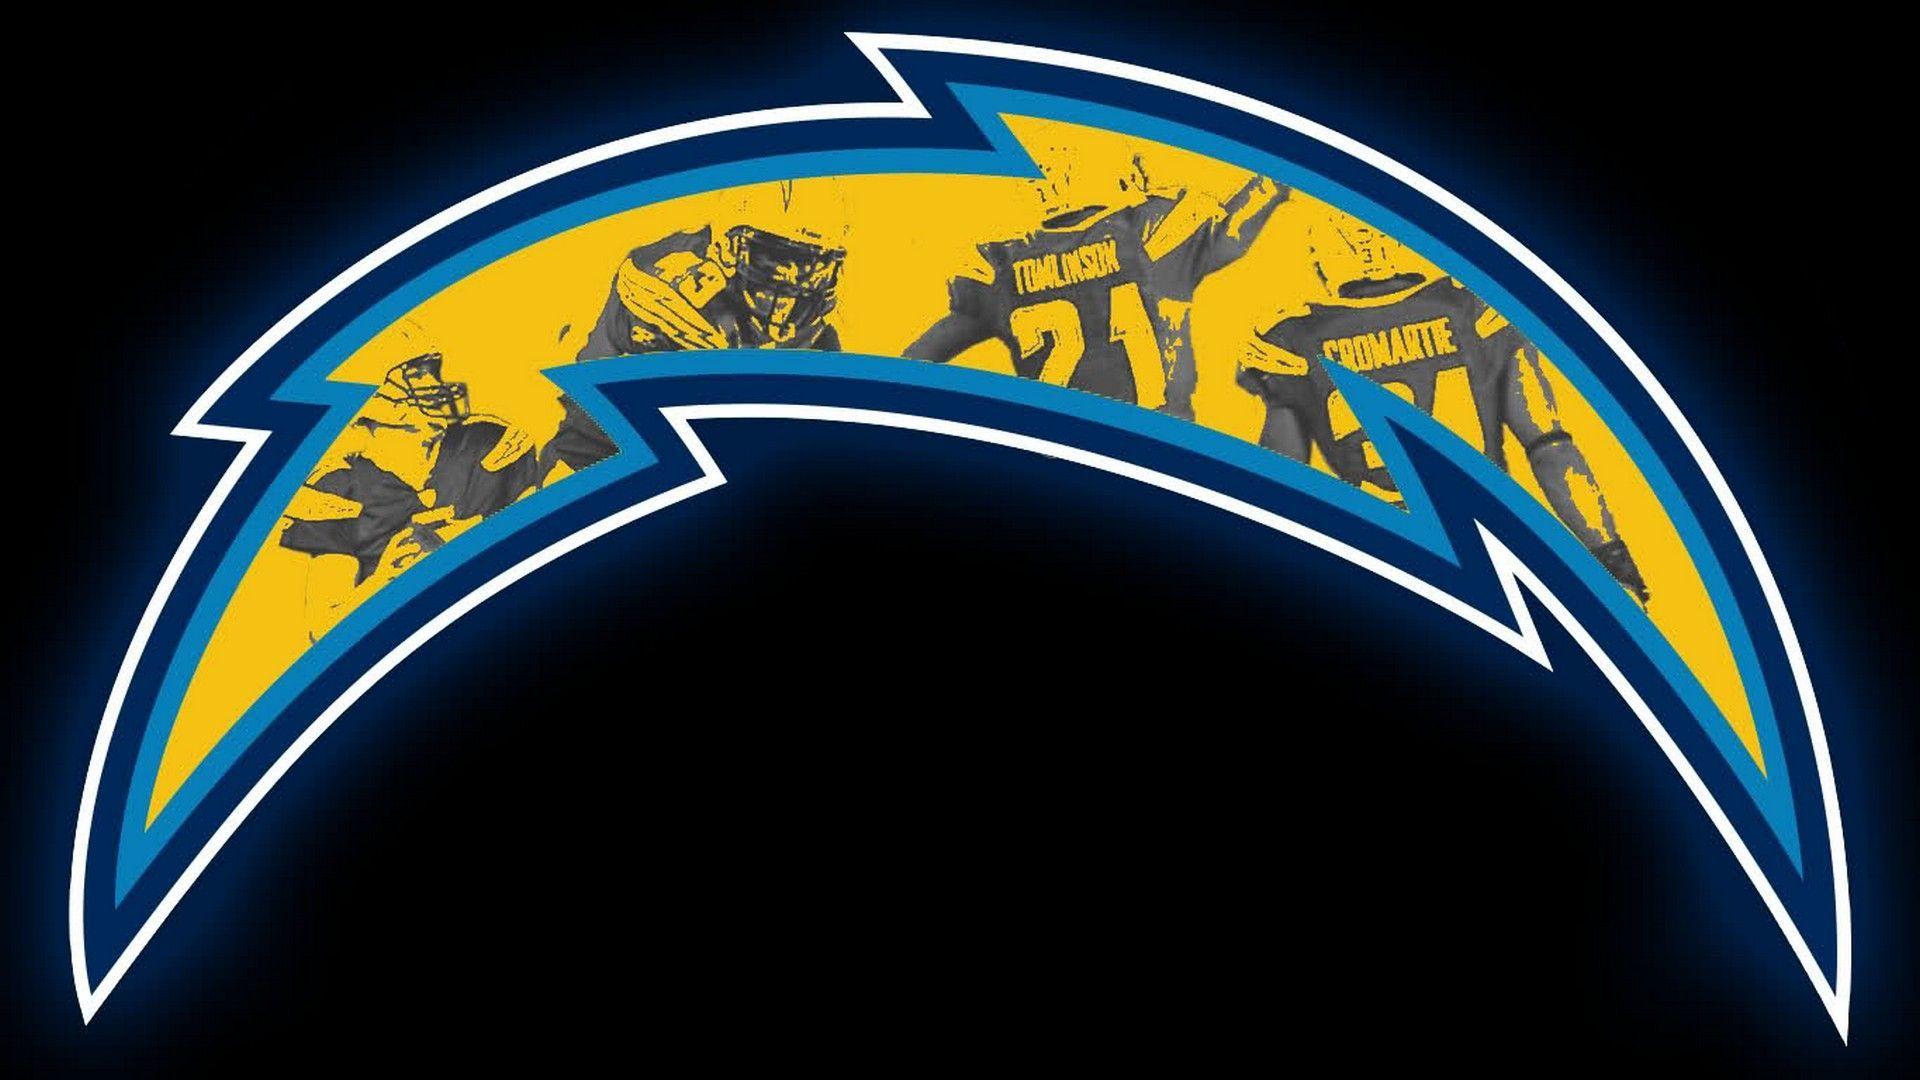 Los Angeles Chargers Wallpaper HD NFL Football Wallpaper. San diego chargers wallpaper, iPhone wallpaper los angeles, San diego chargers